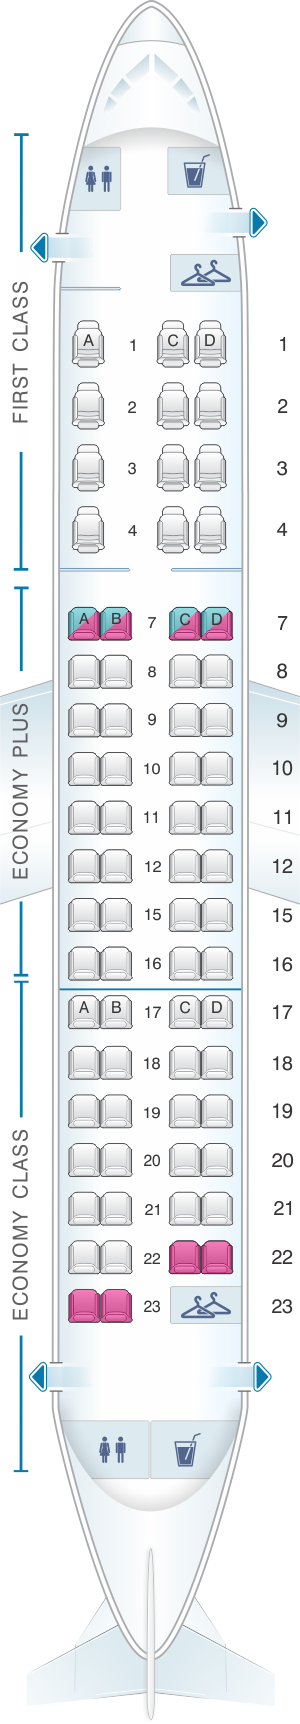 Seat map for United Airlines Embraer EMB 175 version 1